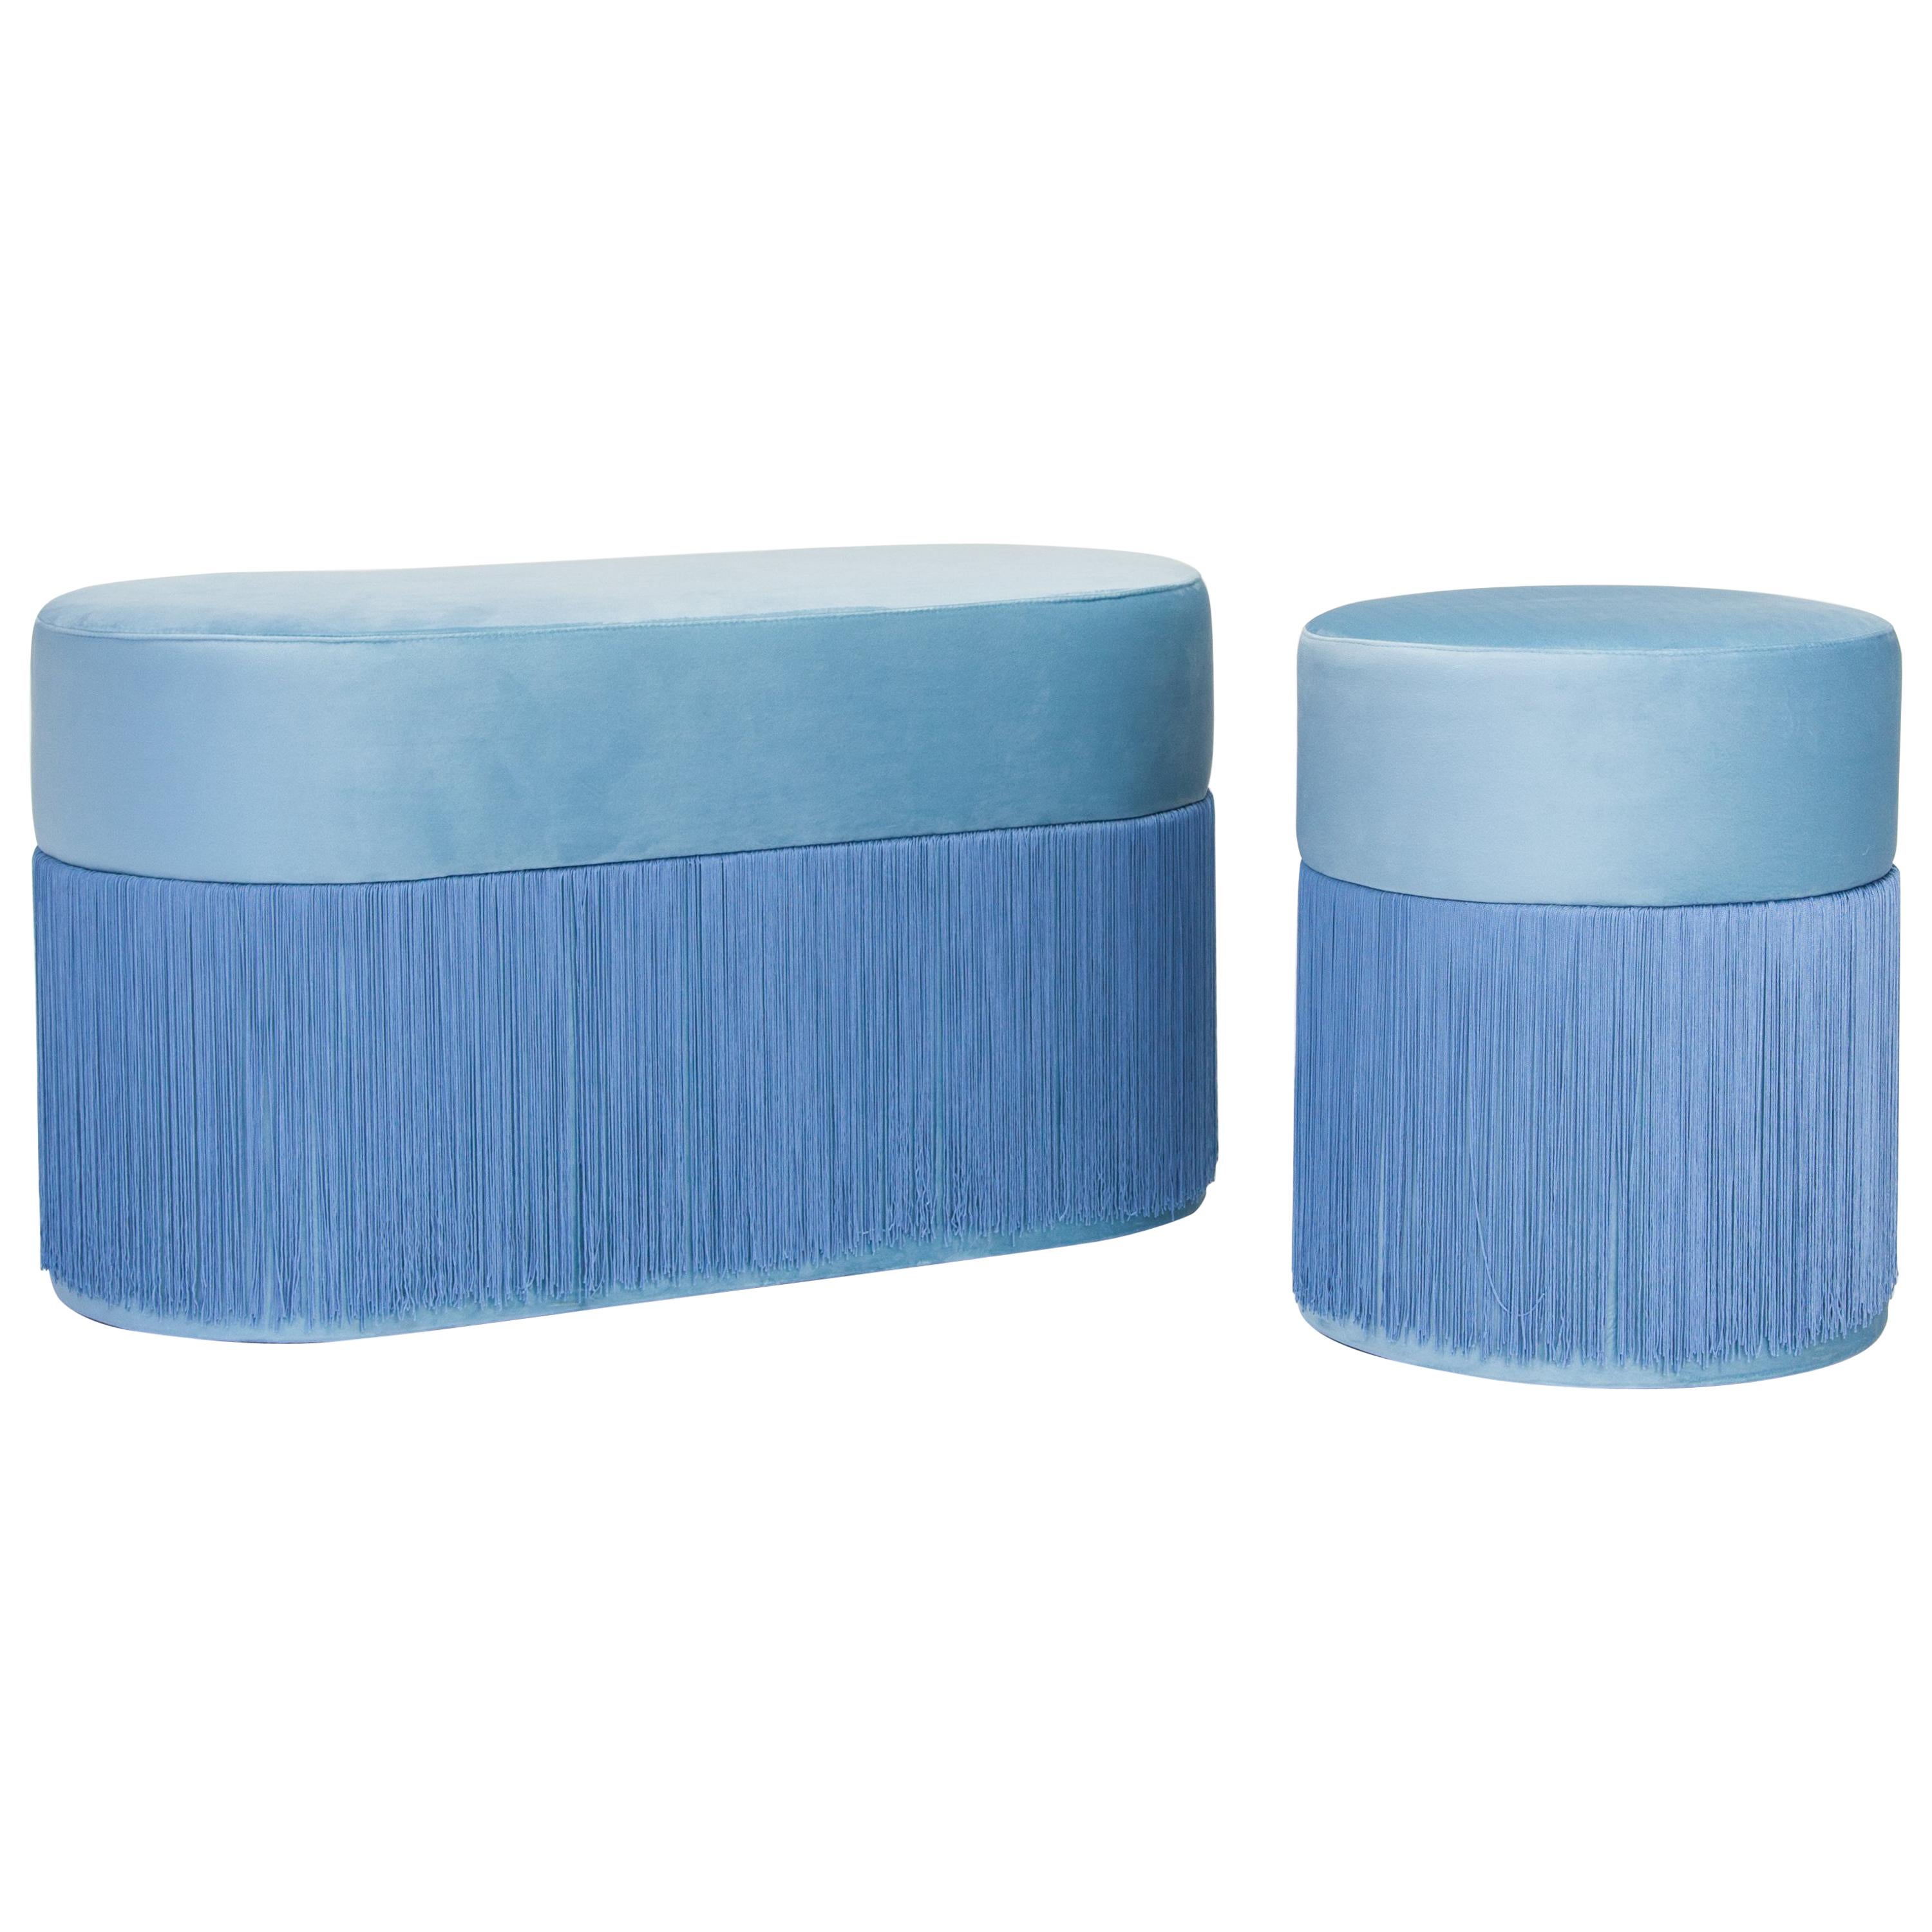 Pair of Pouf Pill Small and Large Blue in Velvet Upholstery and Fringes im Angebot